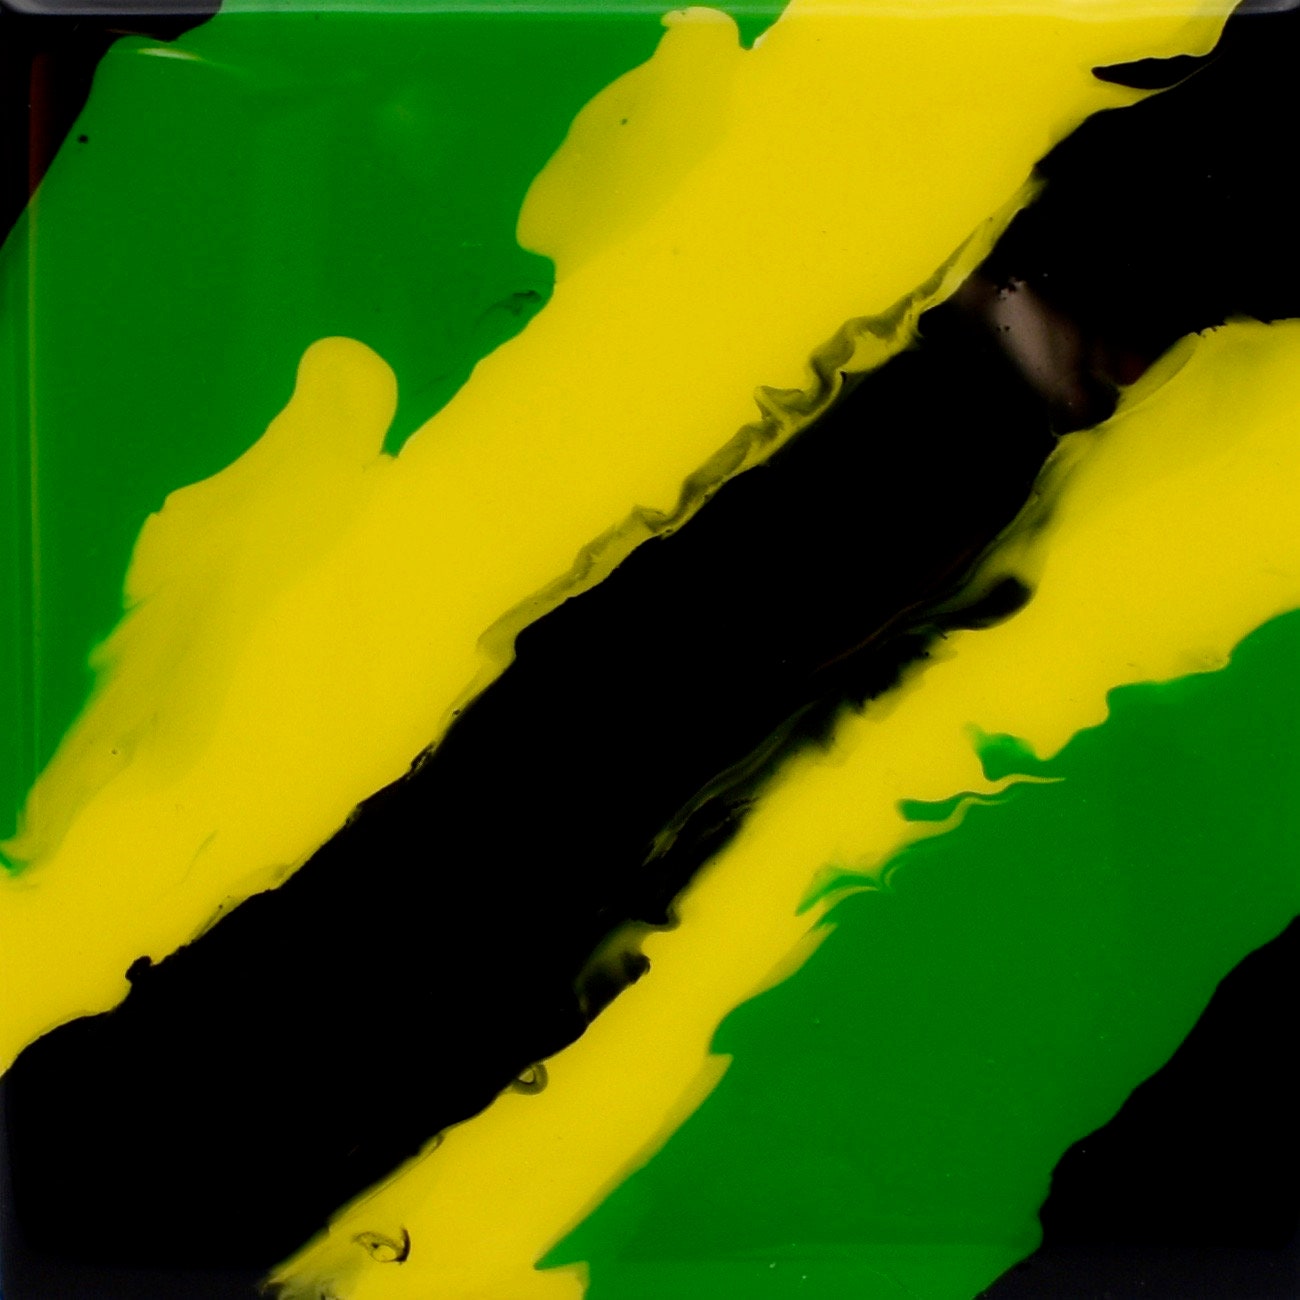 Jamaican Themed Beverage Coasters